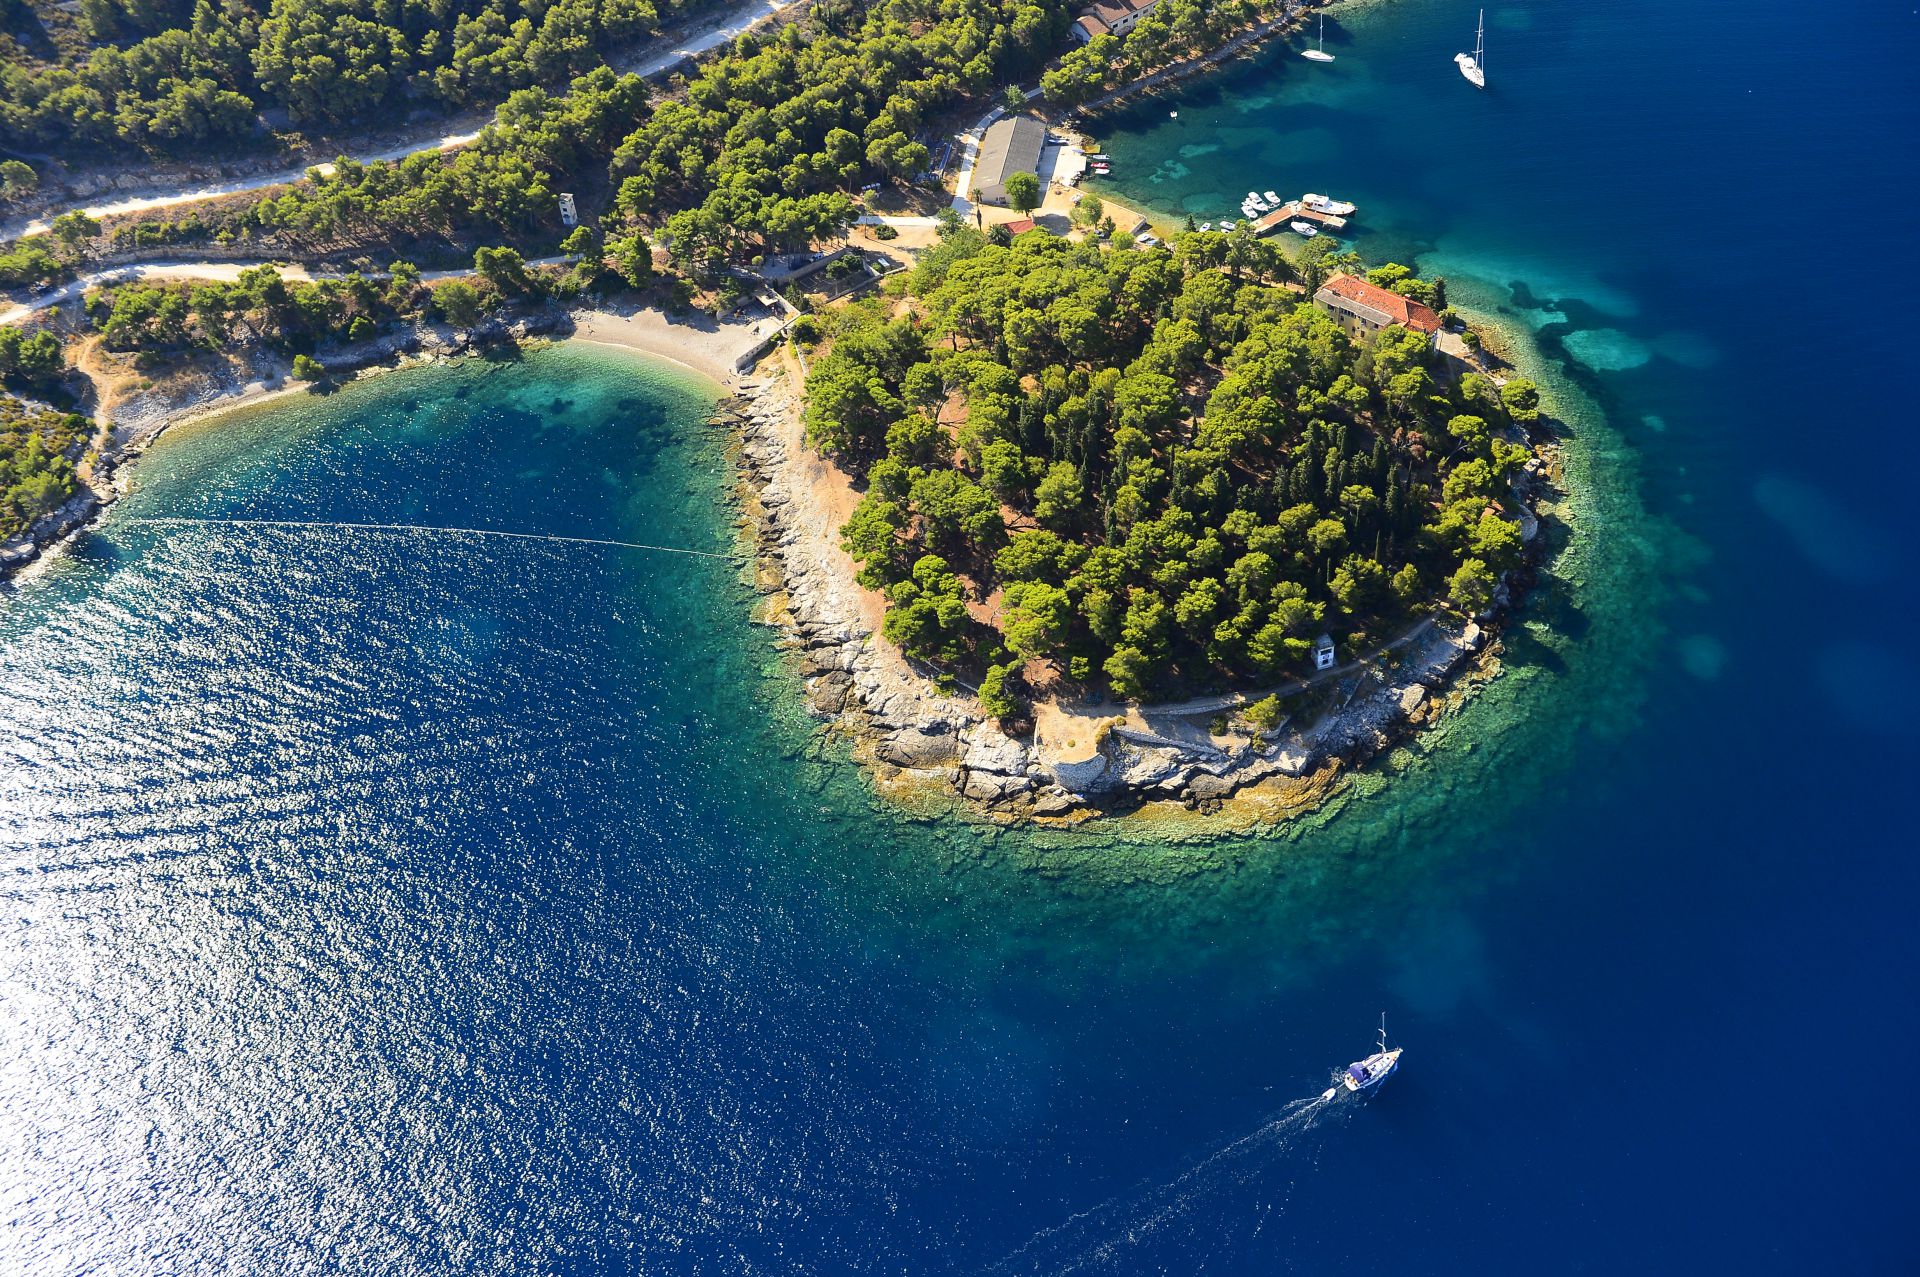 Beaches and bays on the island of Vis